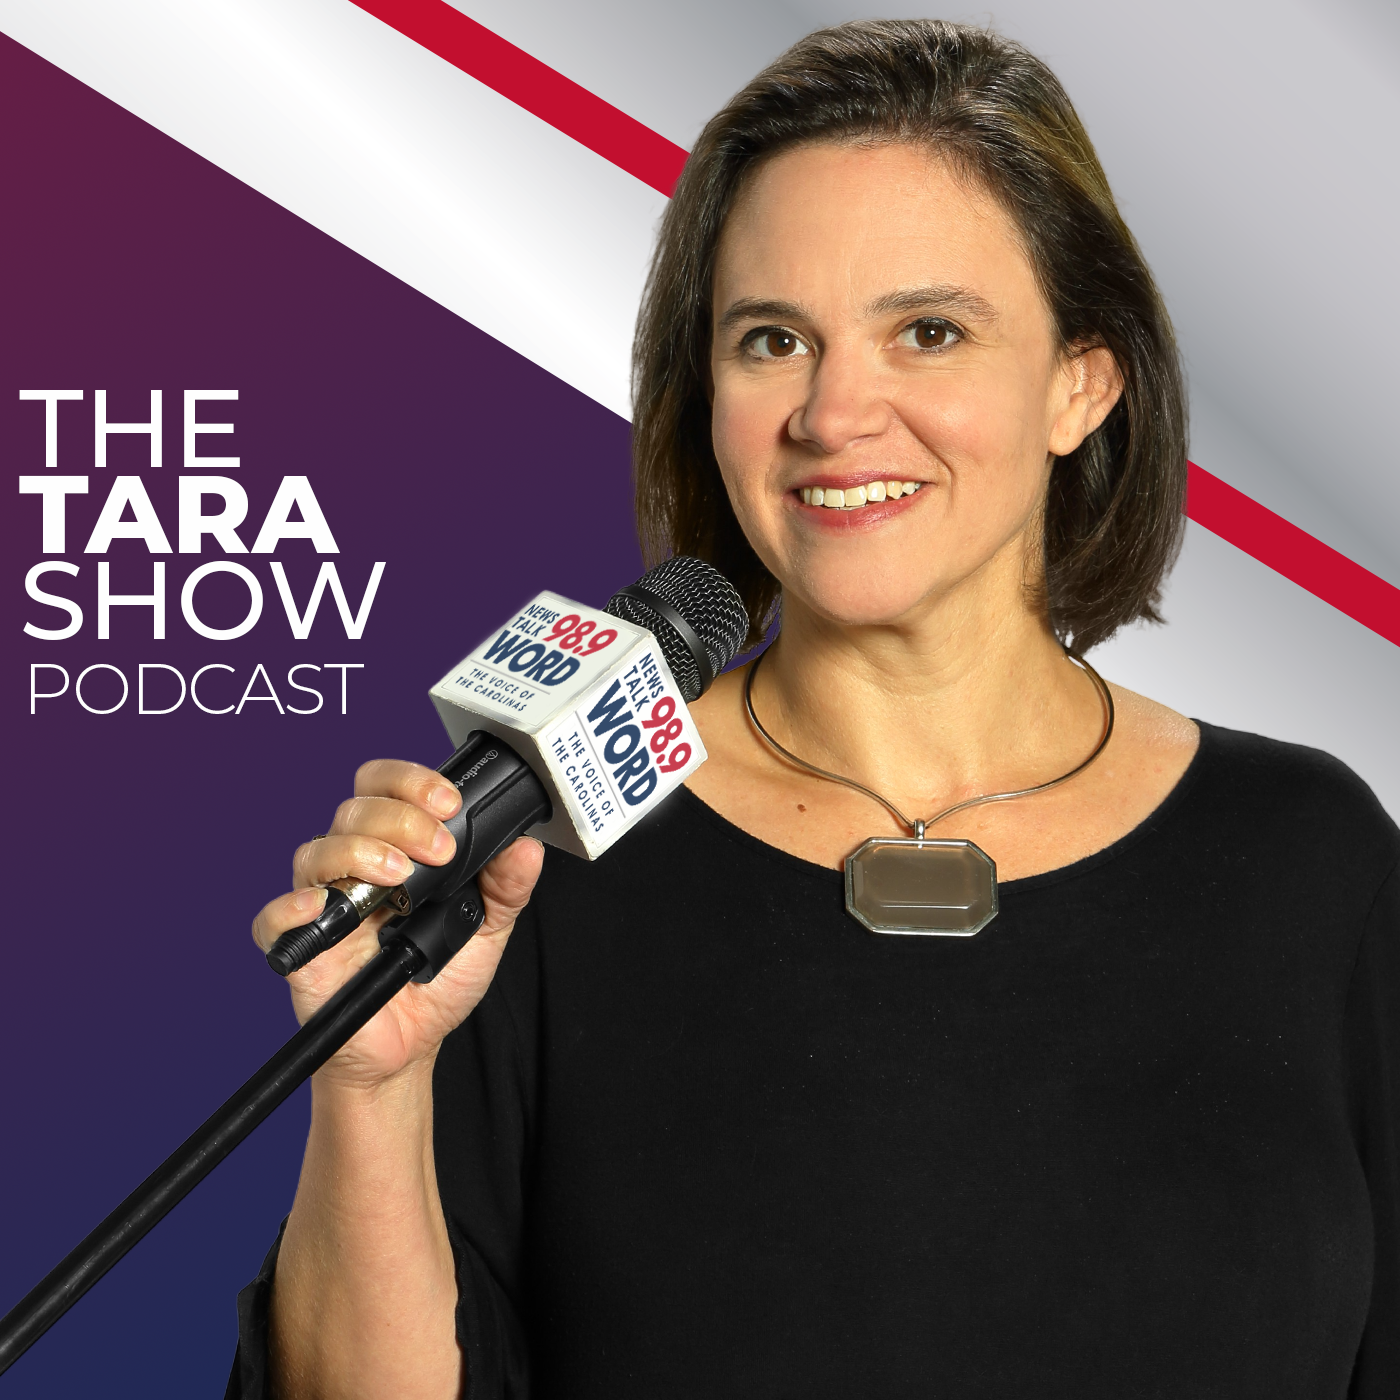 Hour 4: The Tara Show - “Anti Semitism from the Radical Left” “Mob Rule in America” “If you Can’t Debate, Censor” “Text Line Responds” 